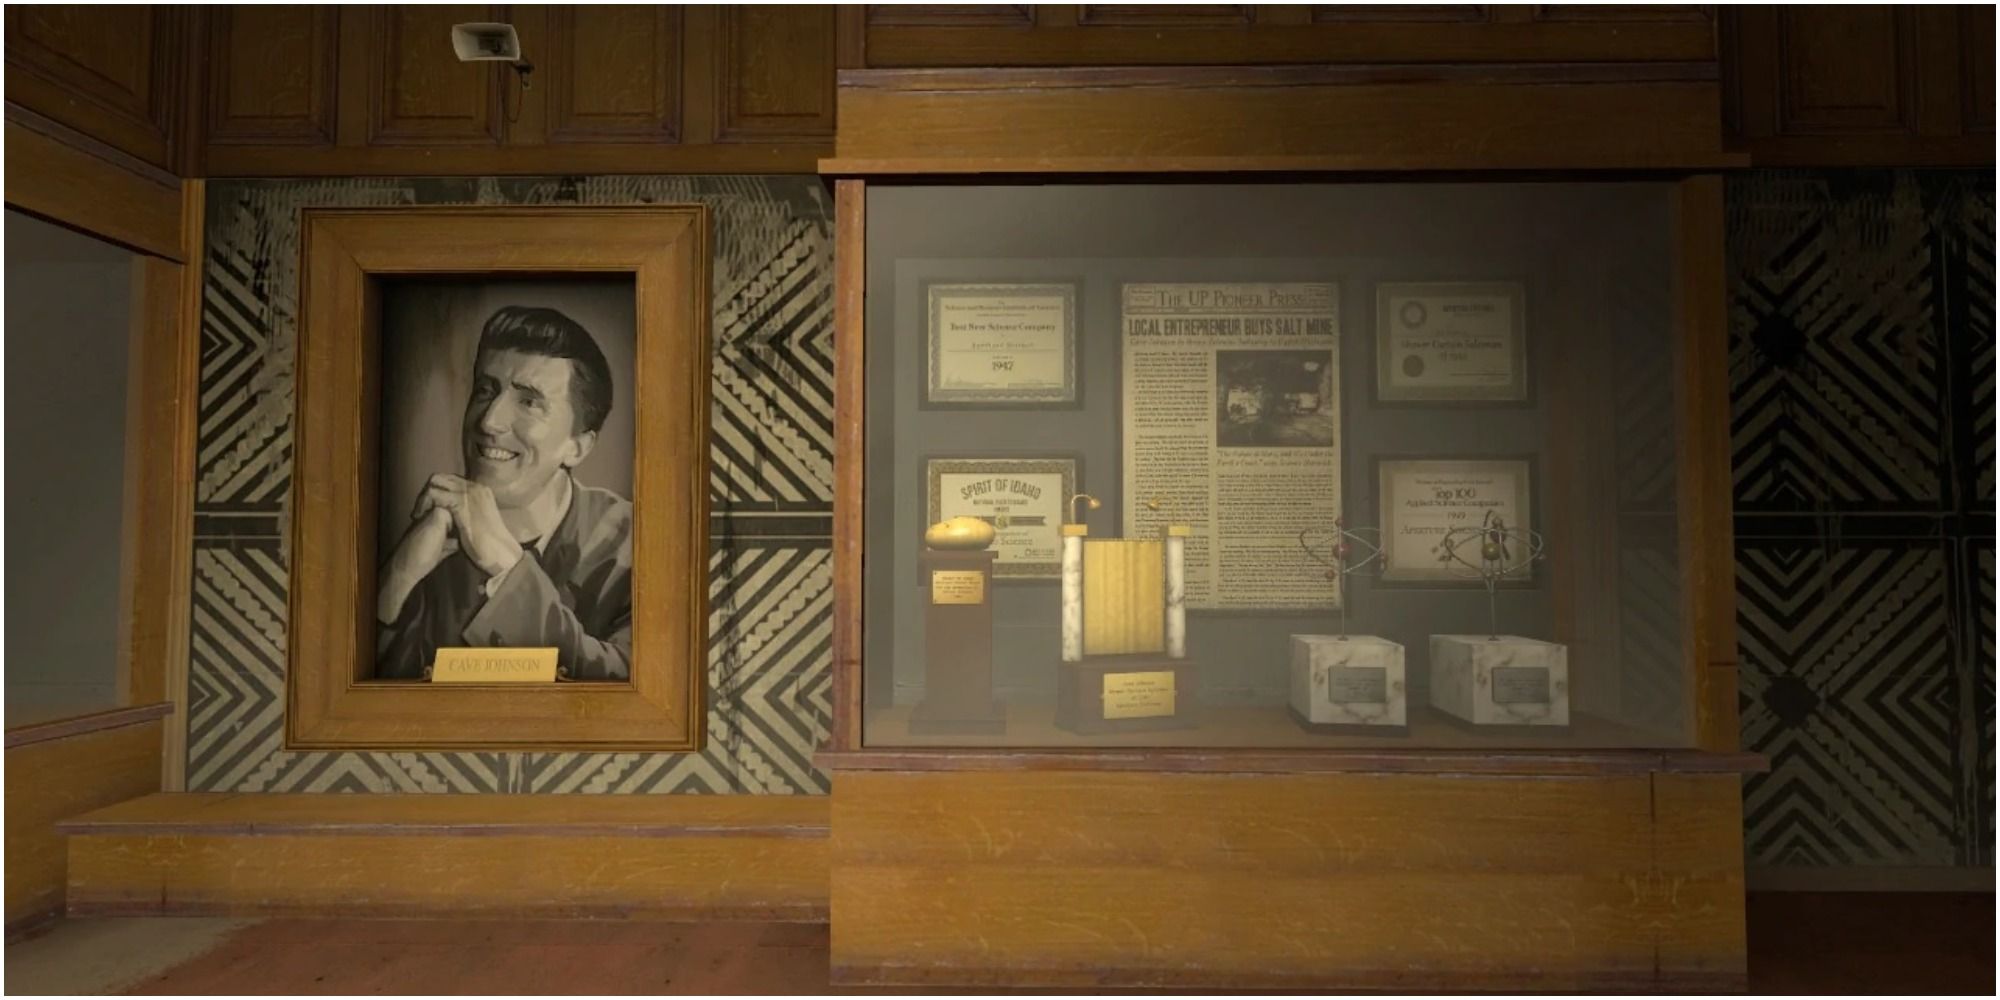 Cave Johnson's portrait and awards in Portal 2